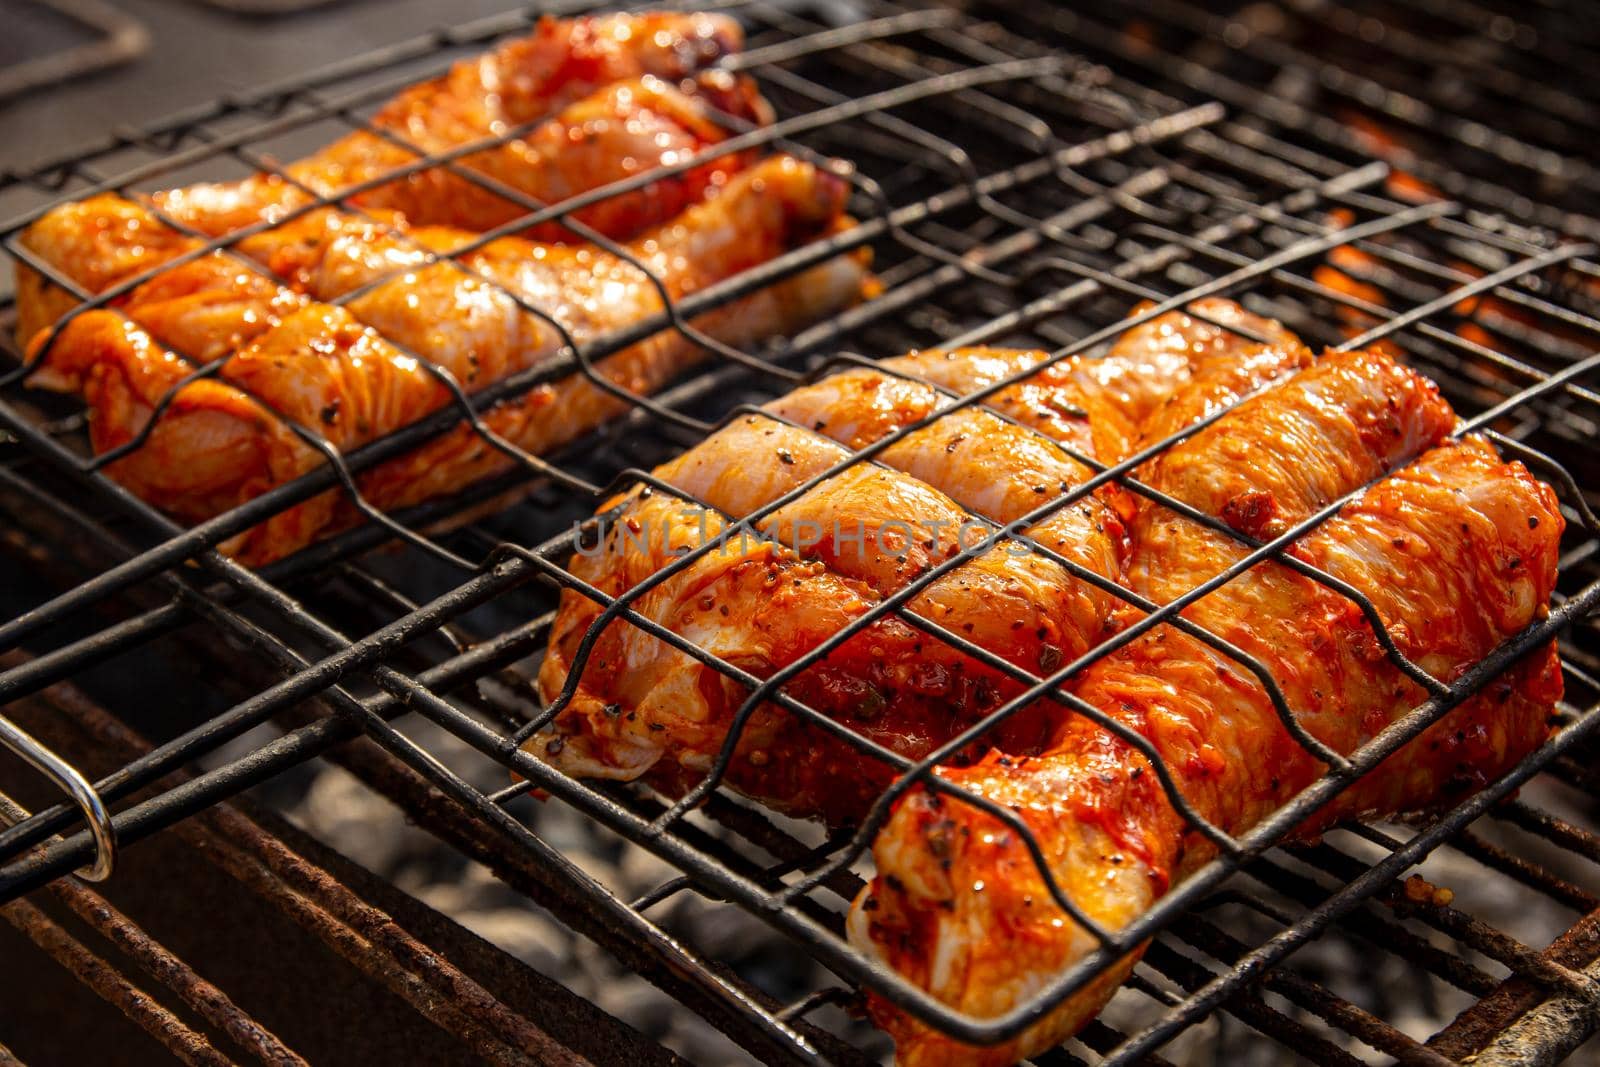 Traditional baked barbecue chicken on a charcoal grill. Grilling and smoking chicken outdoors in nature. by bySergPo